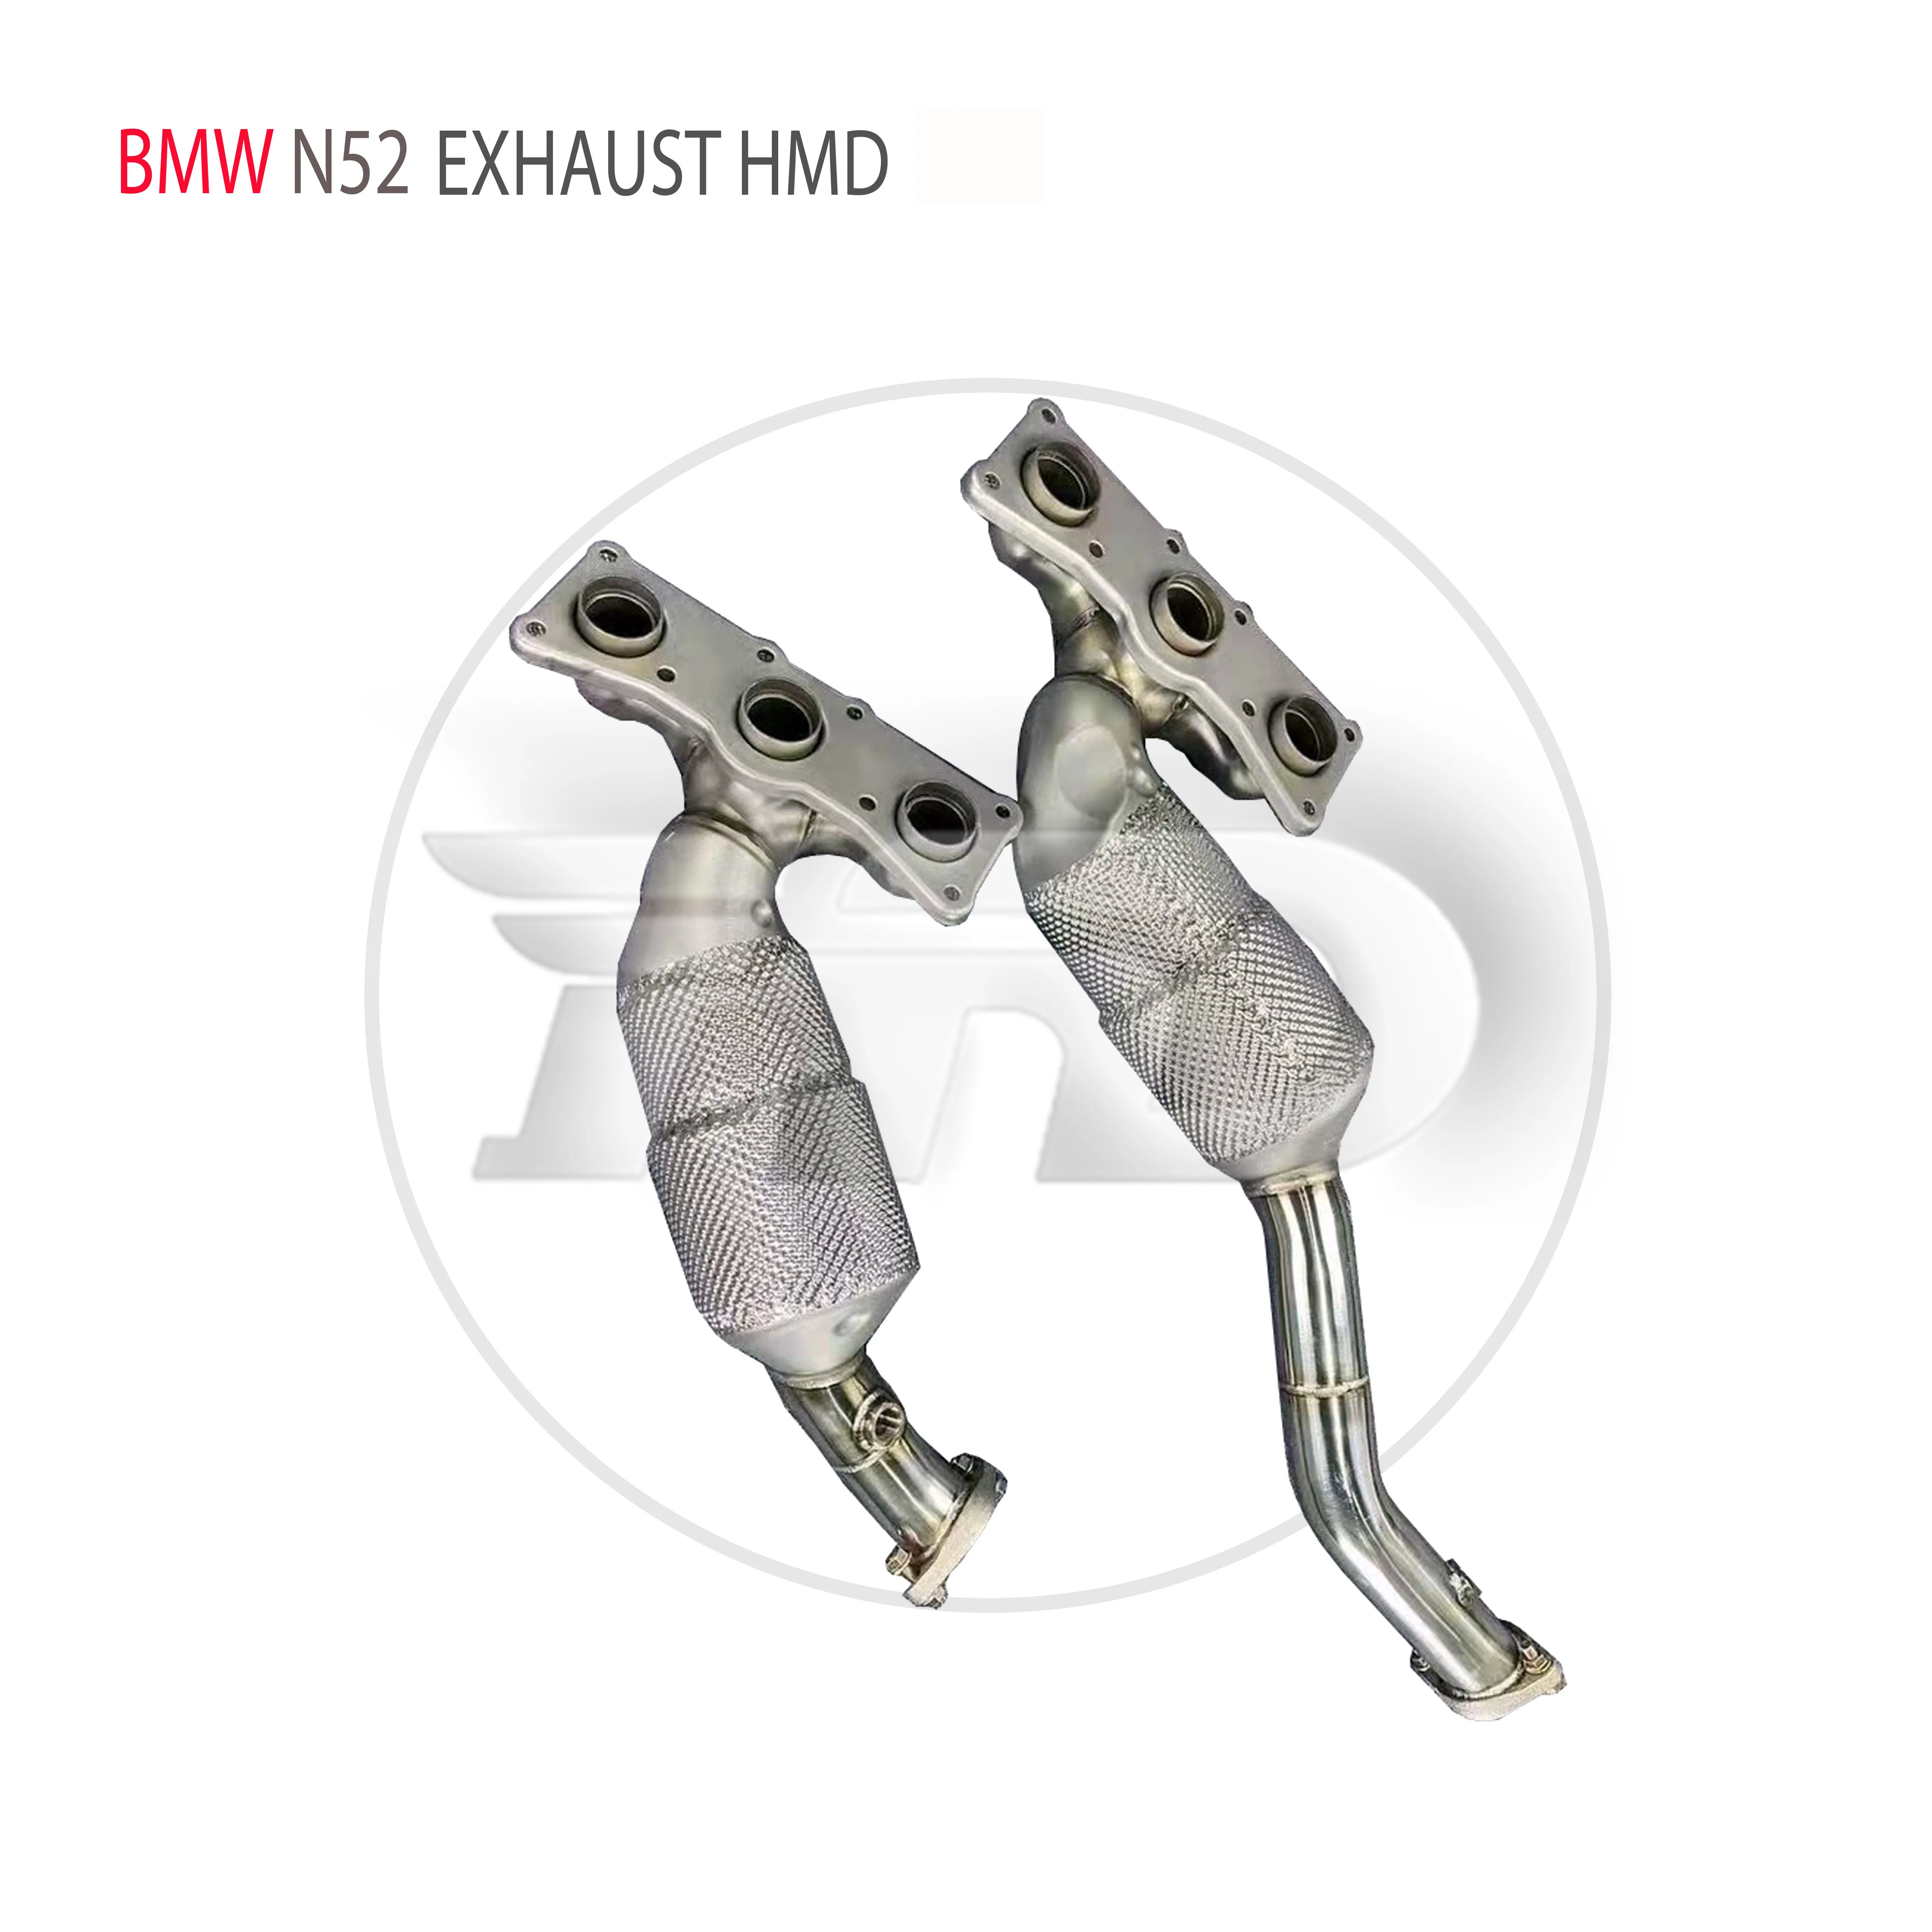 

HMD Exhaust System High Flow Performance Downpipe for BMW X3 28i 30si N52 Engine 3.0L 2006-2012 Car Accessories With Catalytic